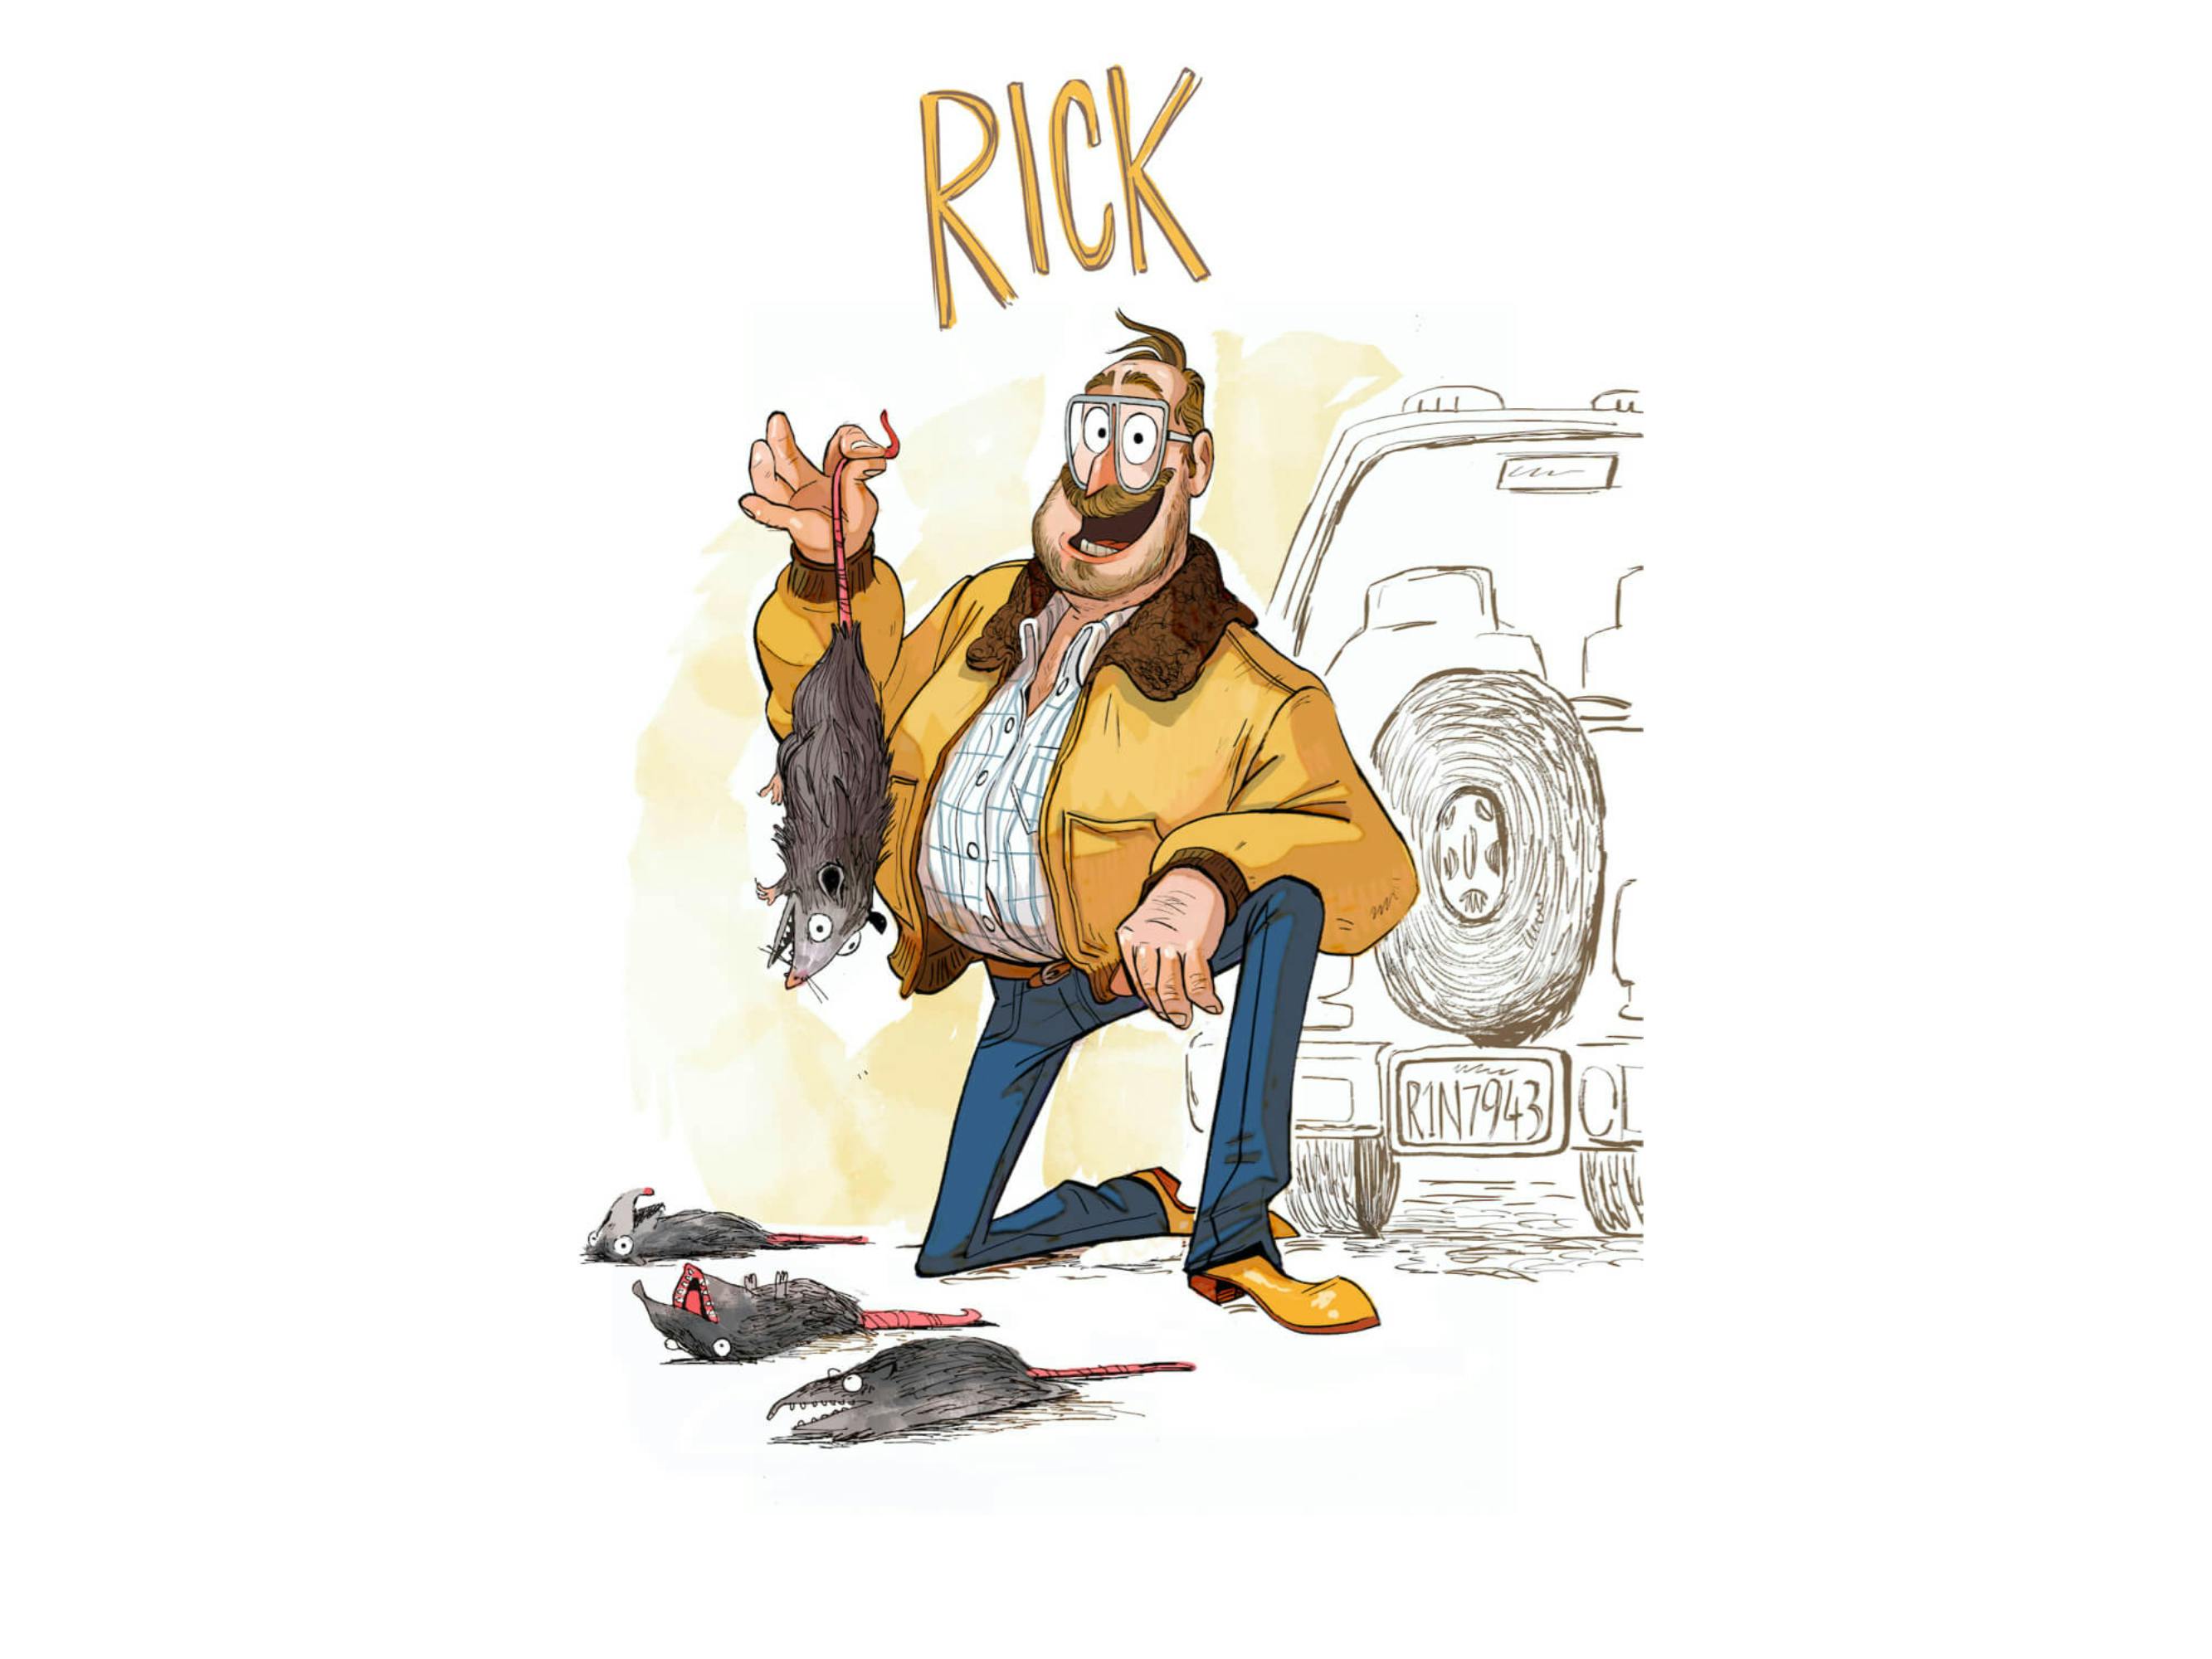 Rick holds a dead rat over three others as he smiles wide. He wears a yellow coat, jeans, and yellow shoes.